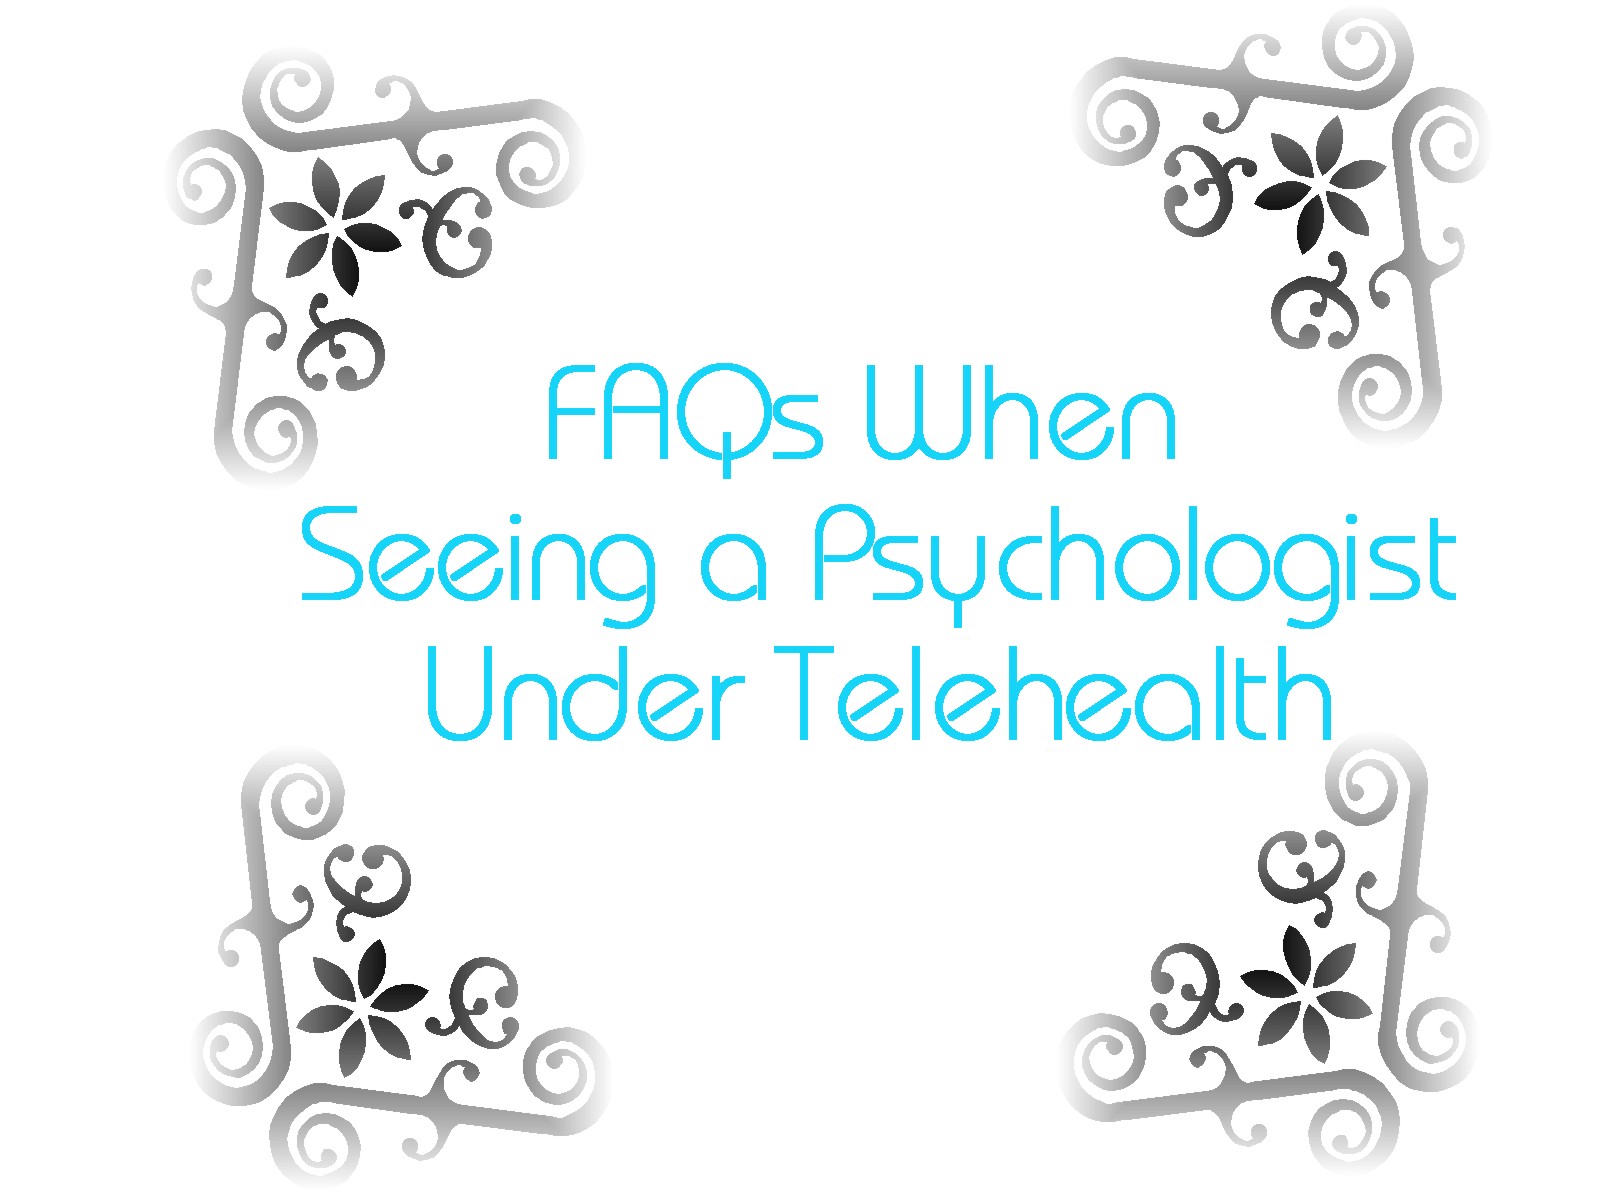 FAQs When Seeing a Psychologist Under Telehealth